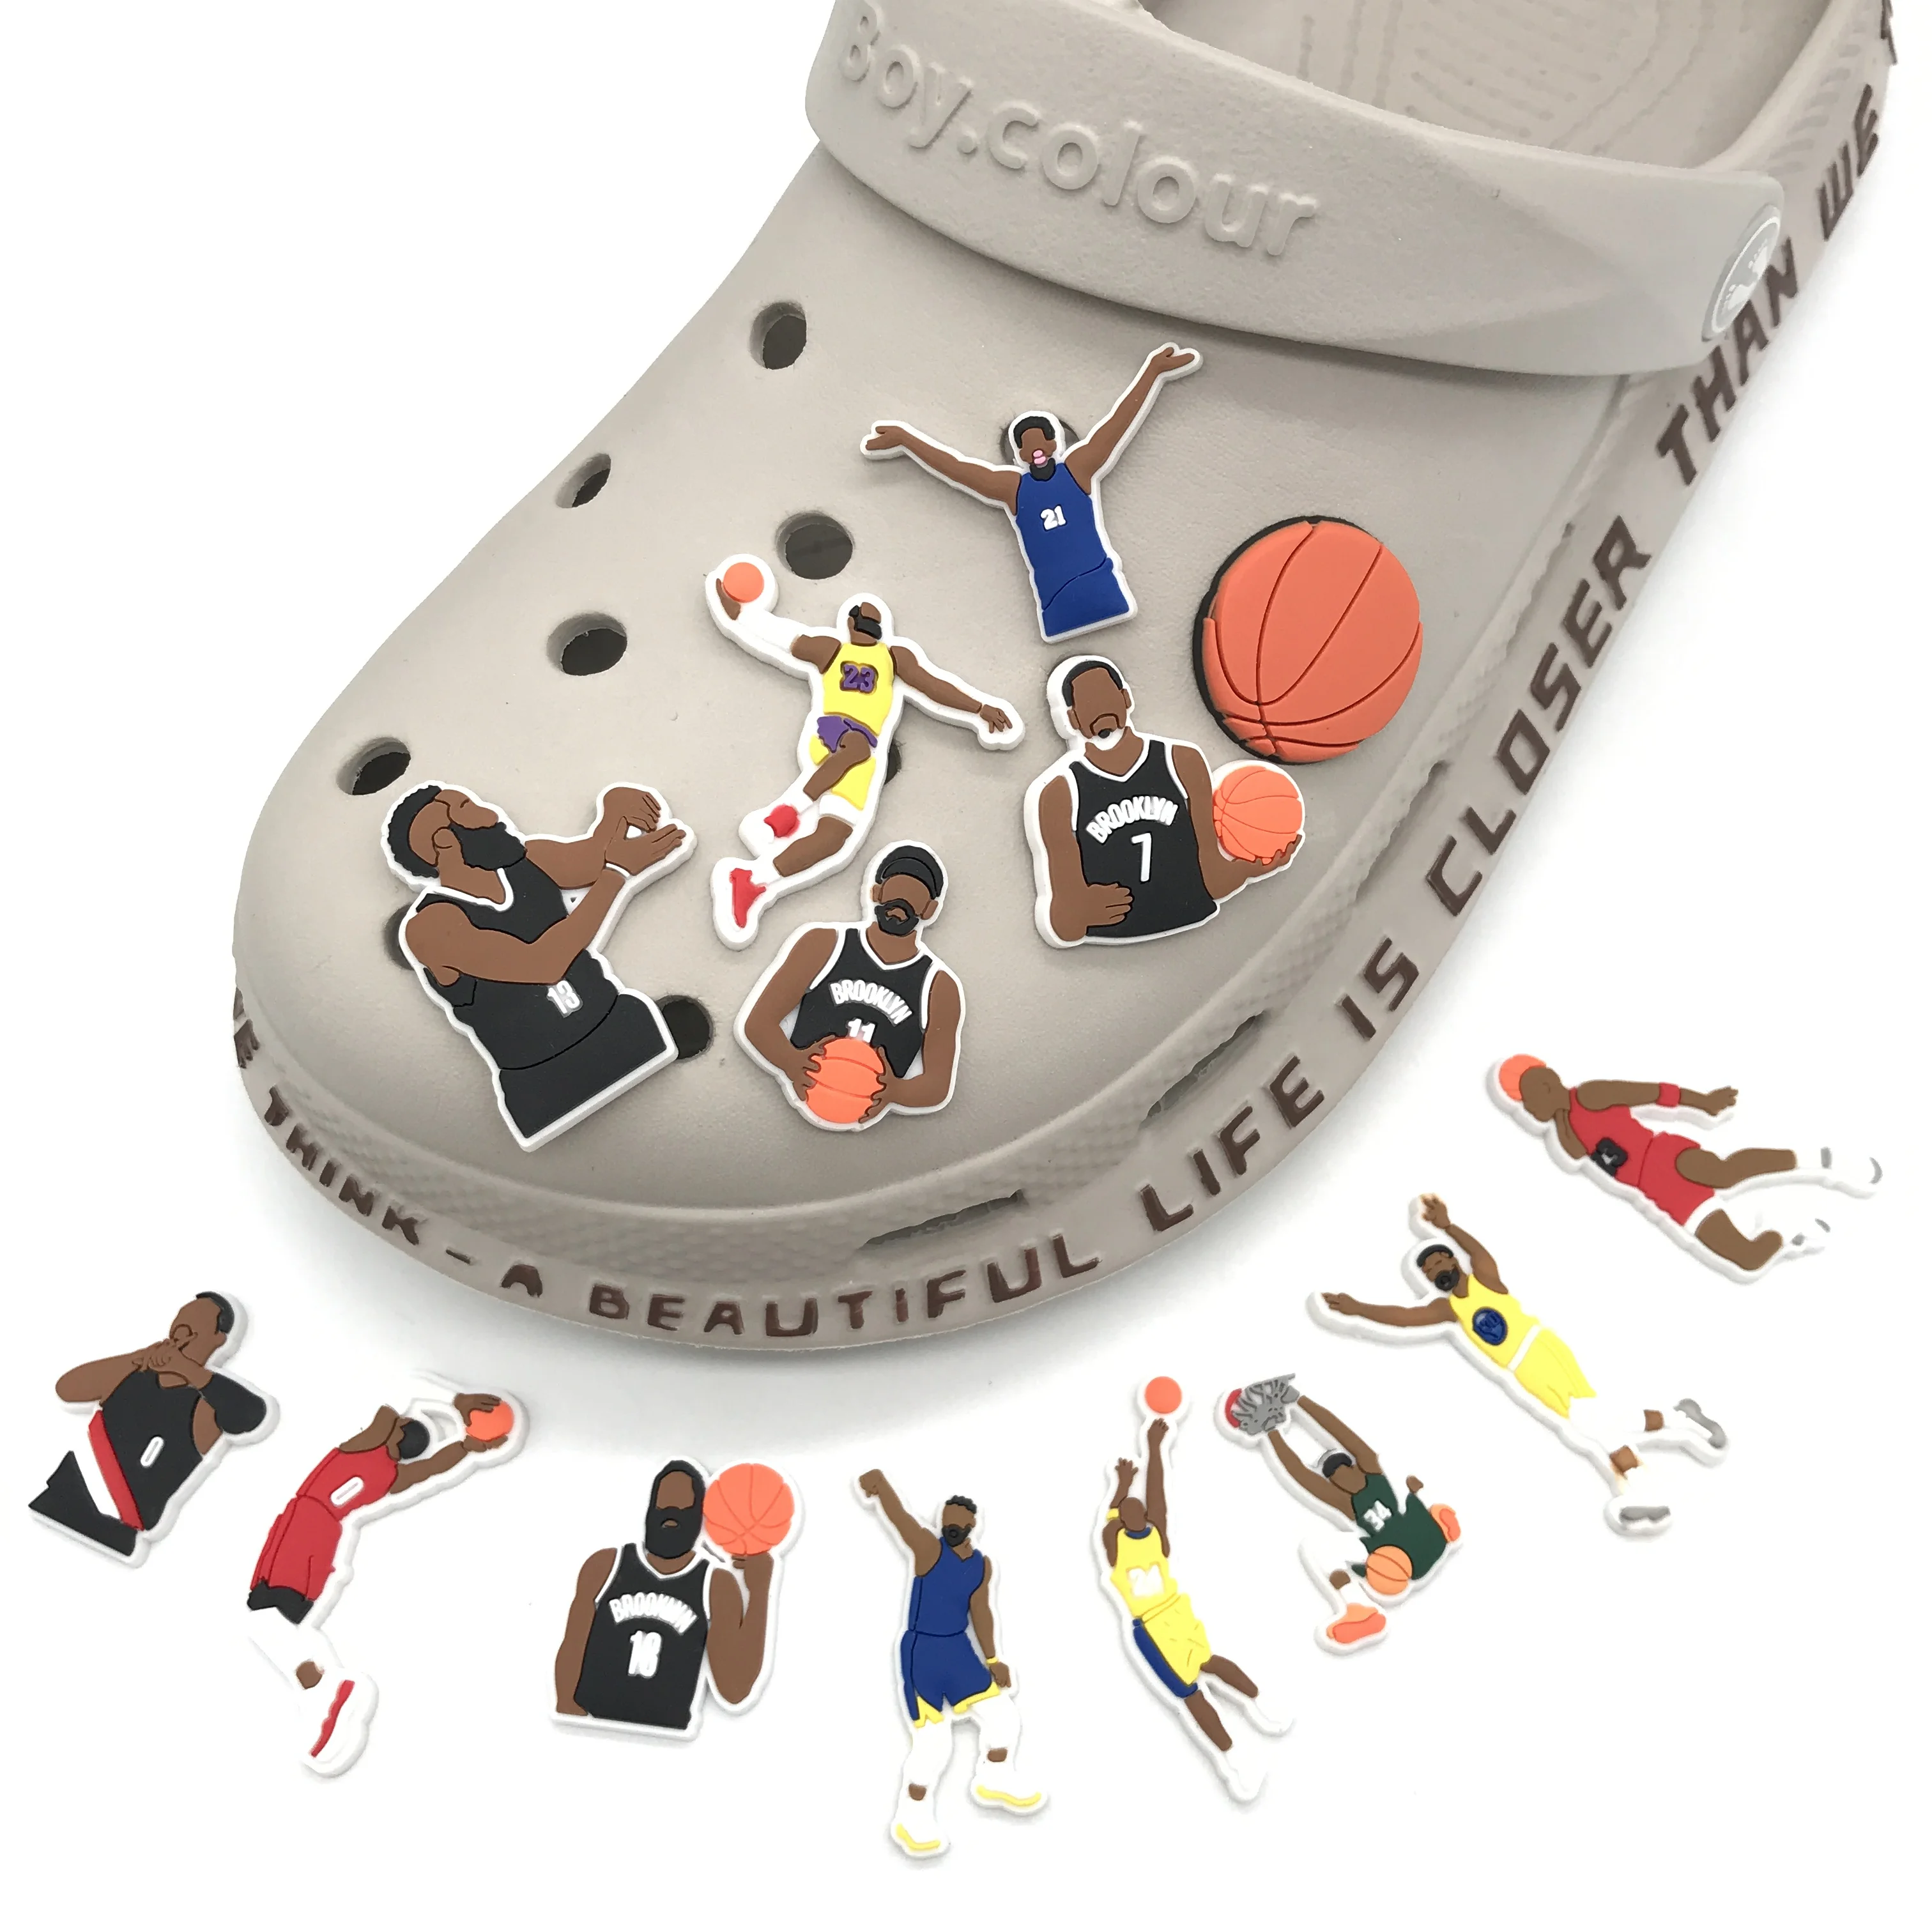 Goods In Stock Lakers Croc Shoe Charms Spurs Miami Heat Basketball Team  Charms Clog For Shoes Accessories - Buy Lakers Croc Shoe Charms,Basketball  Team Charms,Shoes Accessories Product on 